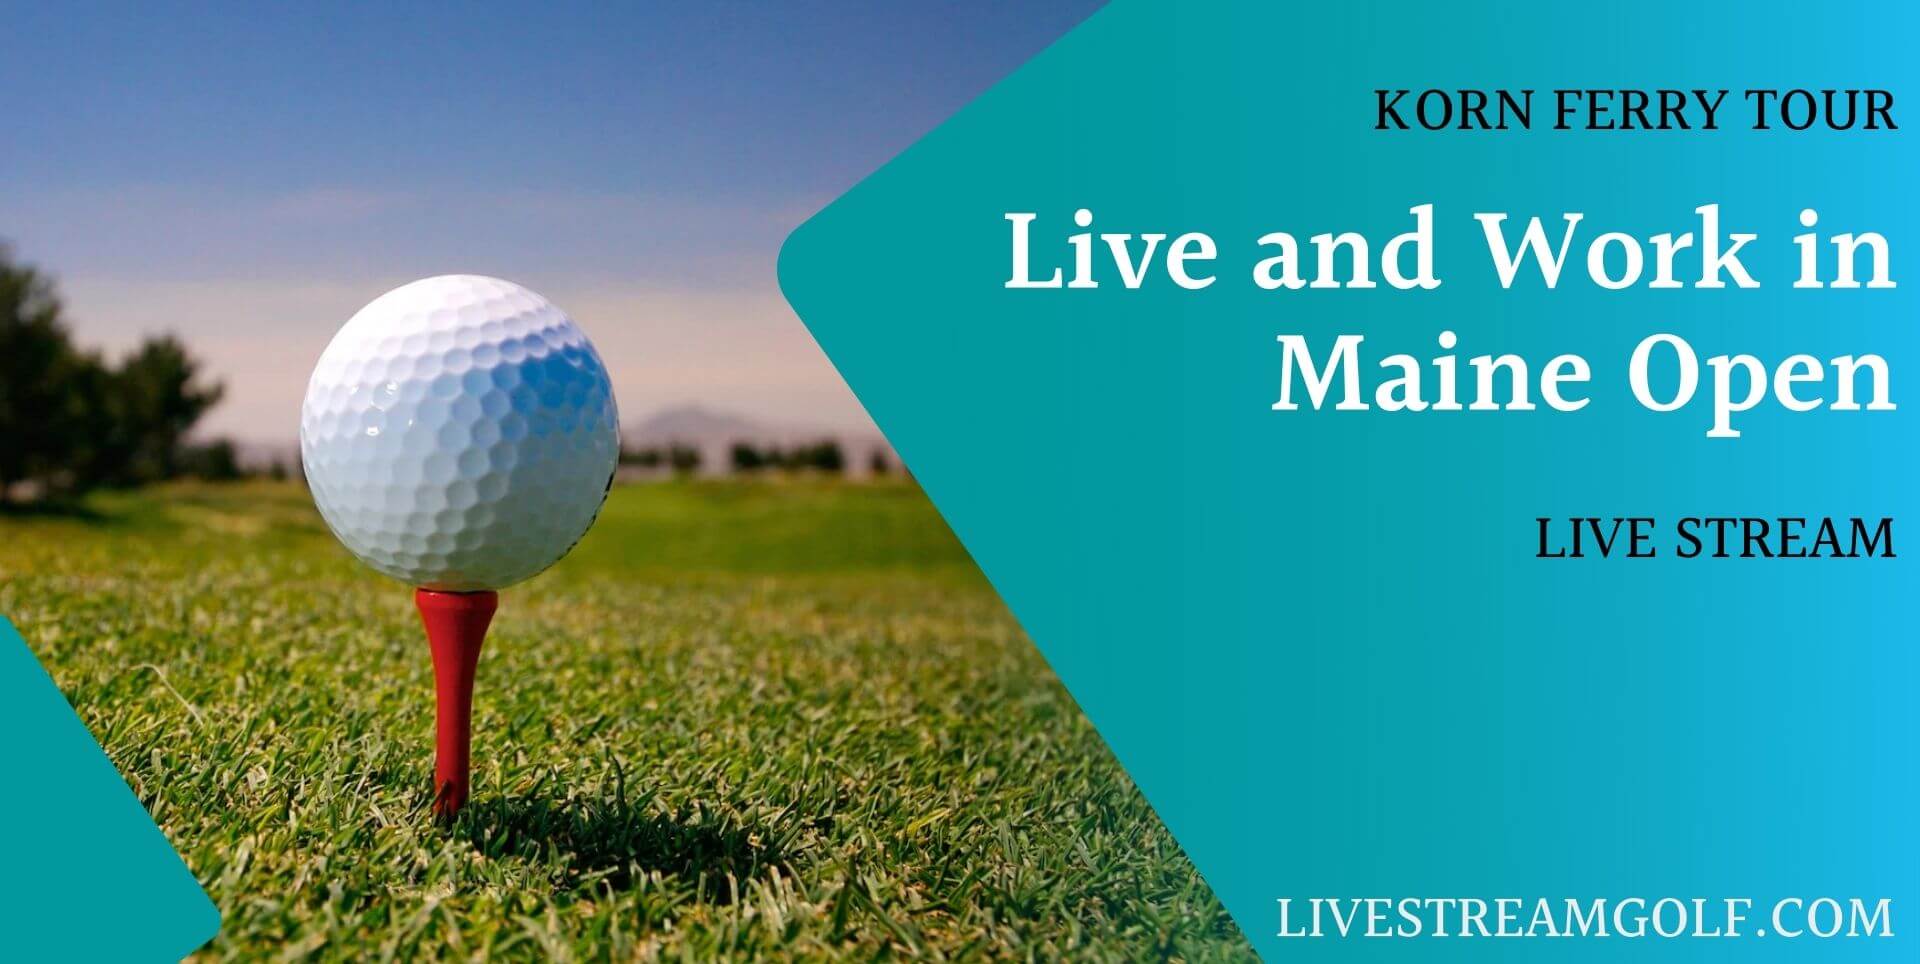 Live And Work In Maine Open Day 4 Live Stream: Korn Ferry 2022